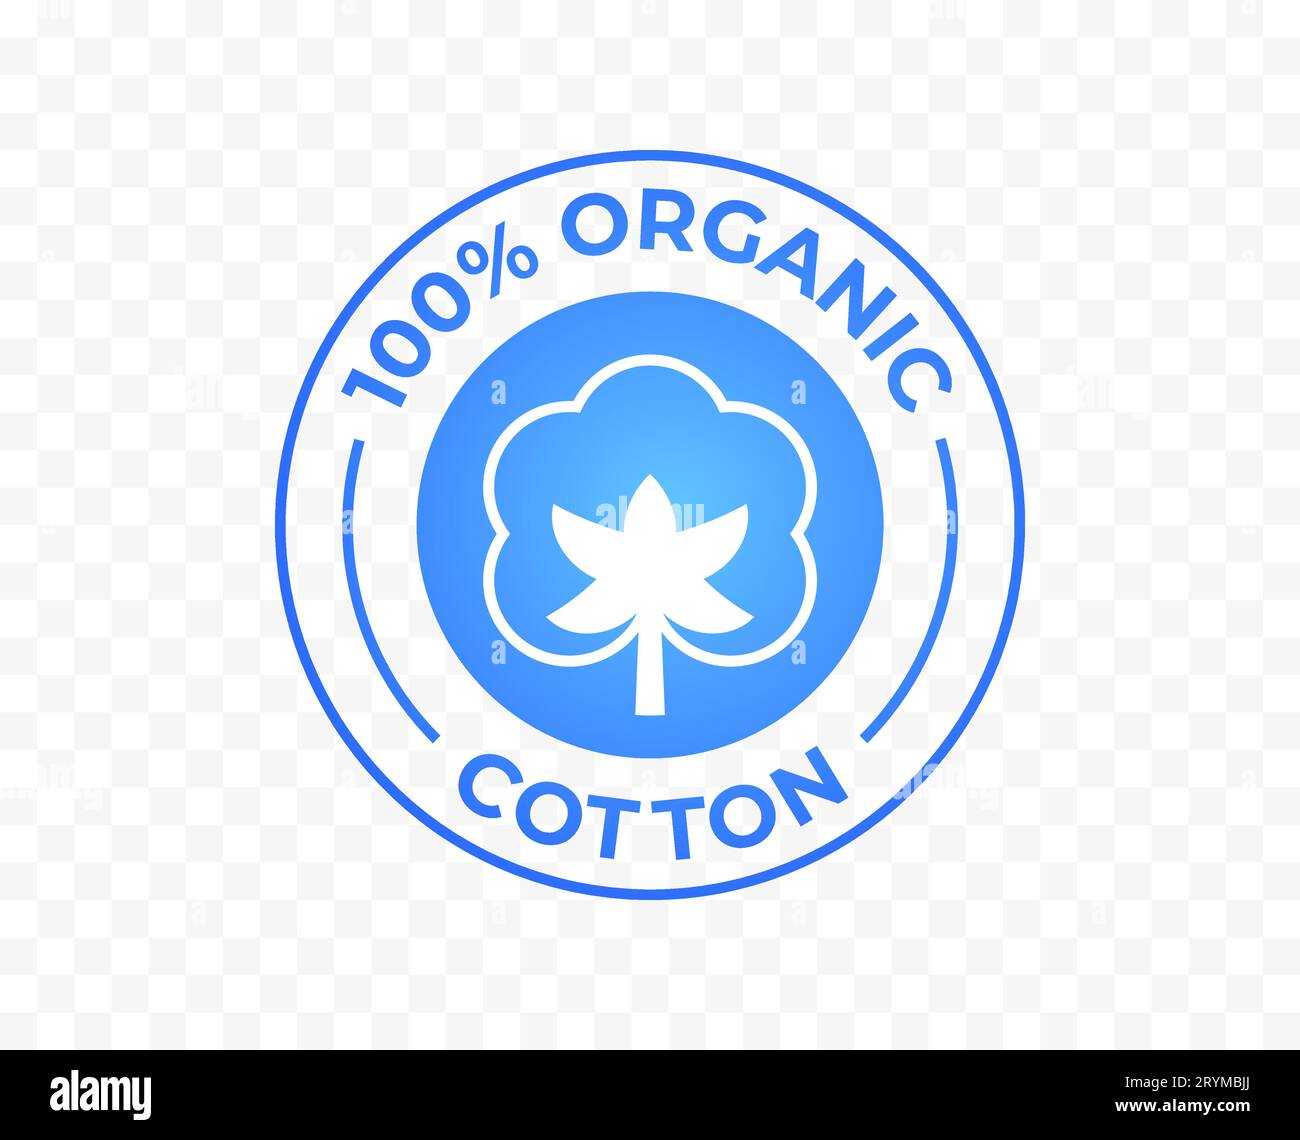 Cotton icon. Cotton fabric symbol. Natural product material